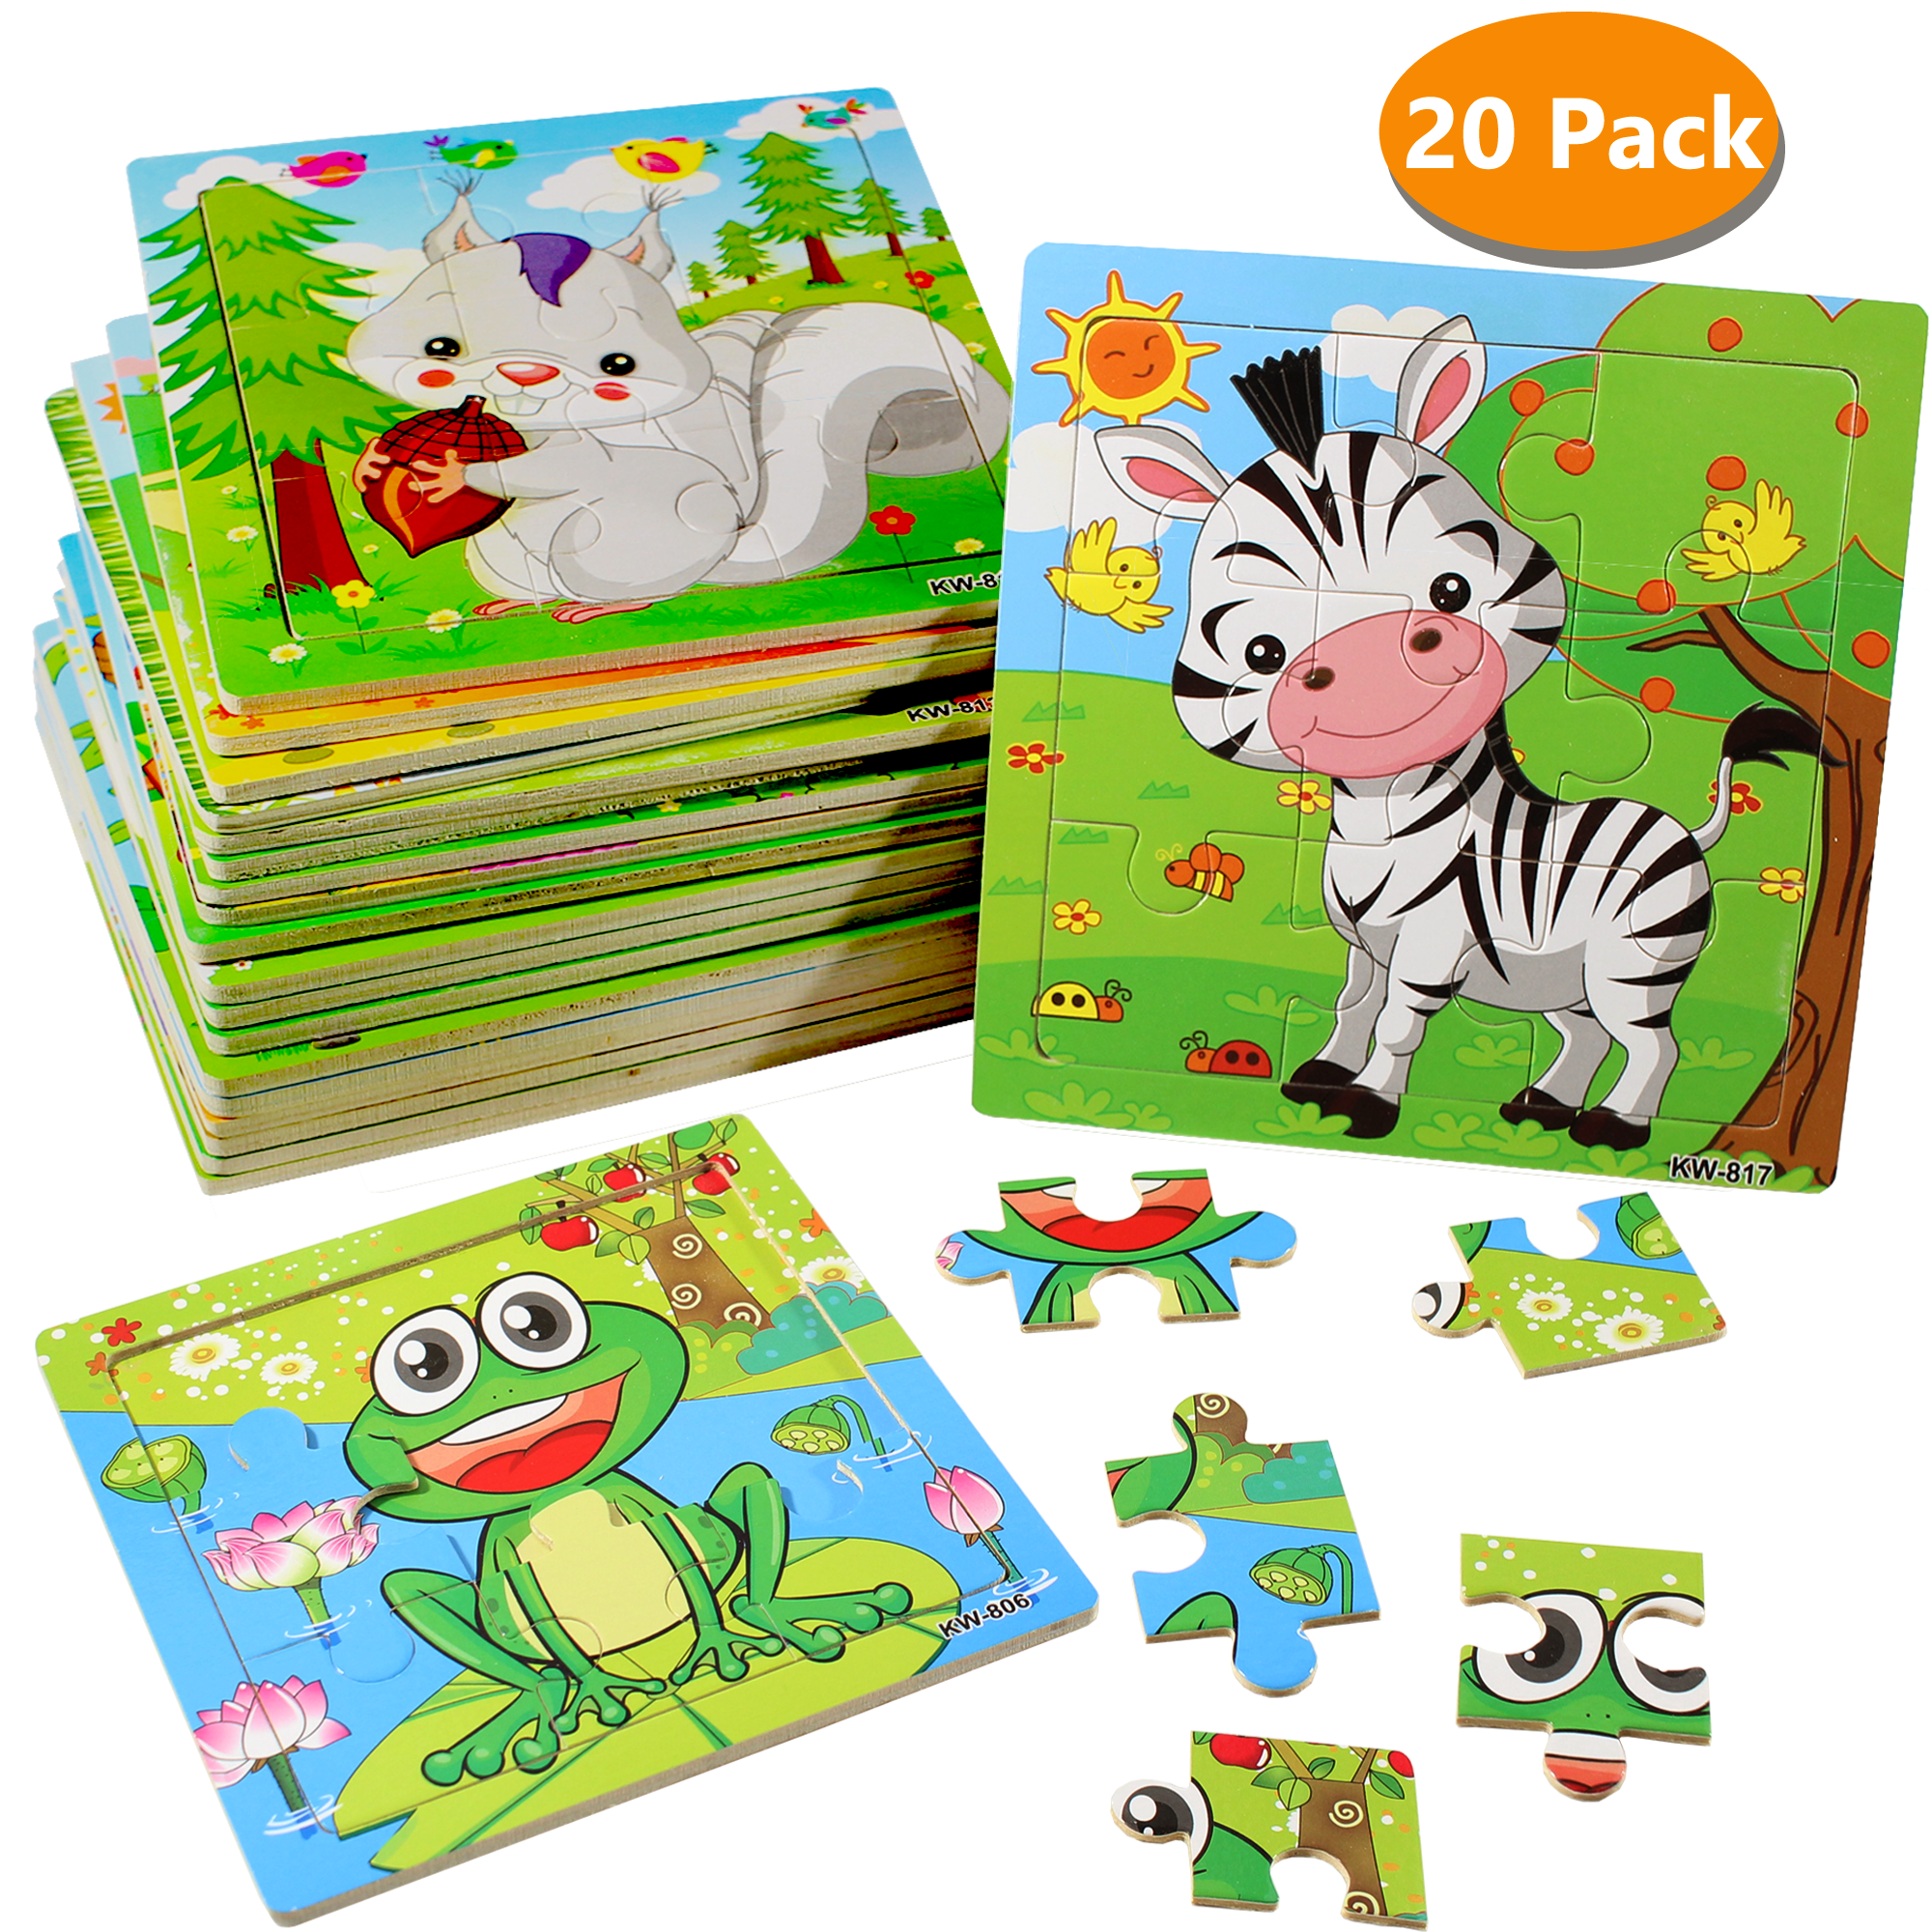 4 Set Wooden Jigsaw Puzzle for Kids Age 3 4 5 6 Childrens Puzzle 40 Pieces Educational Animal Puzzles for Toddler Boys and Girls 